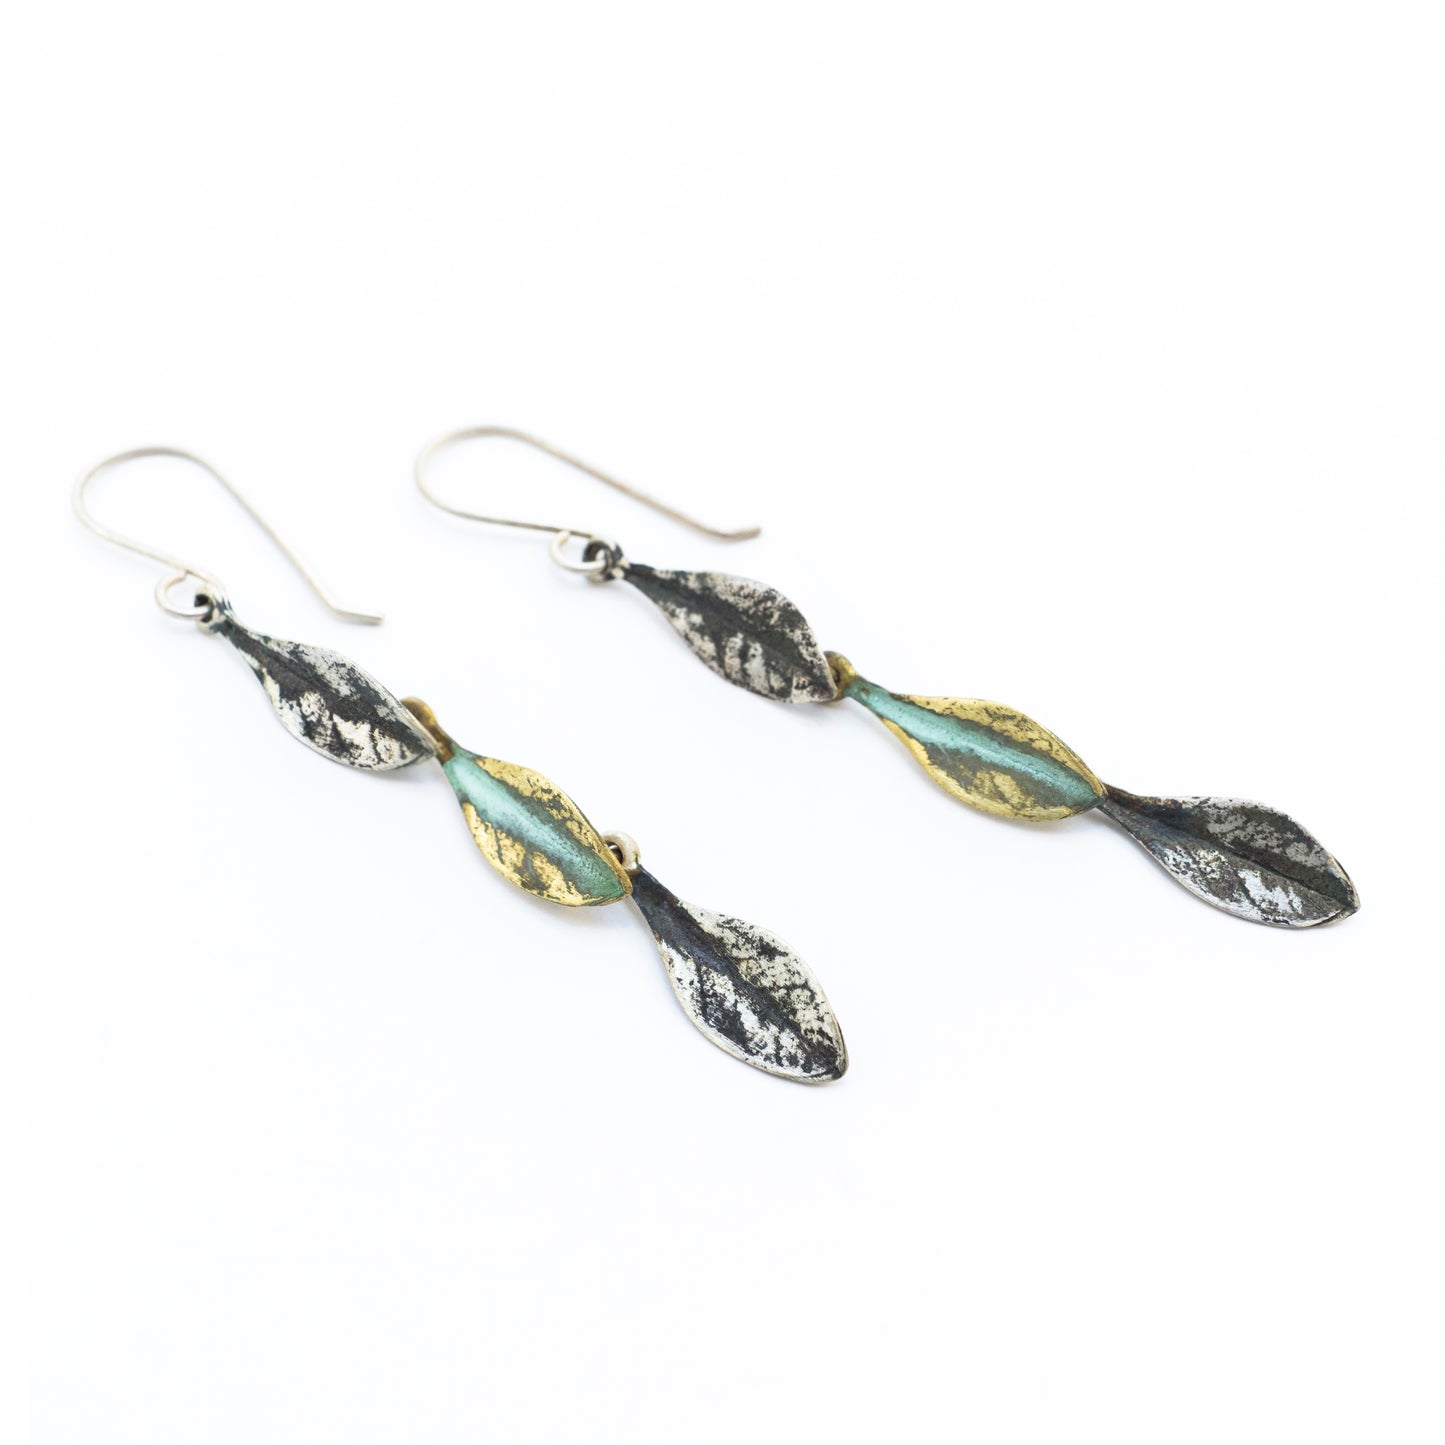 Handcrafted Sterling Silver and Brass Eugenia Triple Leaf Dangle Earrings - Unique One-of-a-Kind Nature-Inspired Jewelry